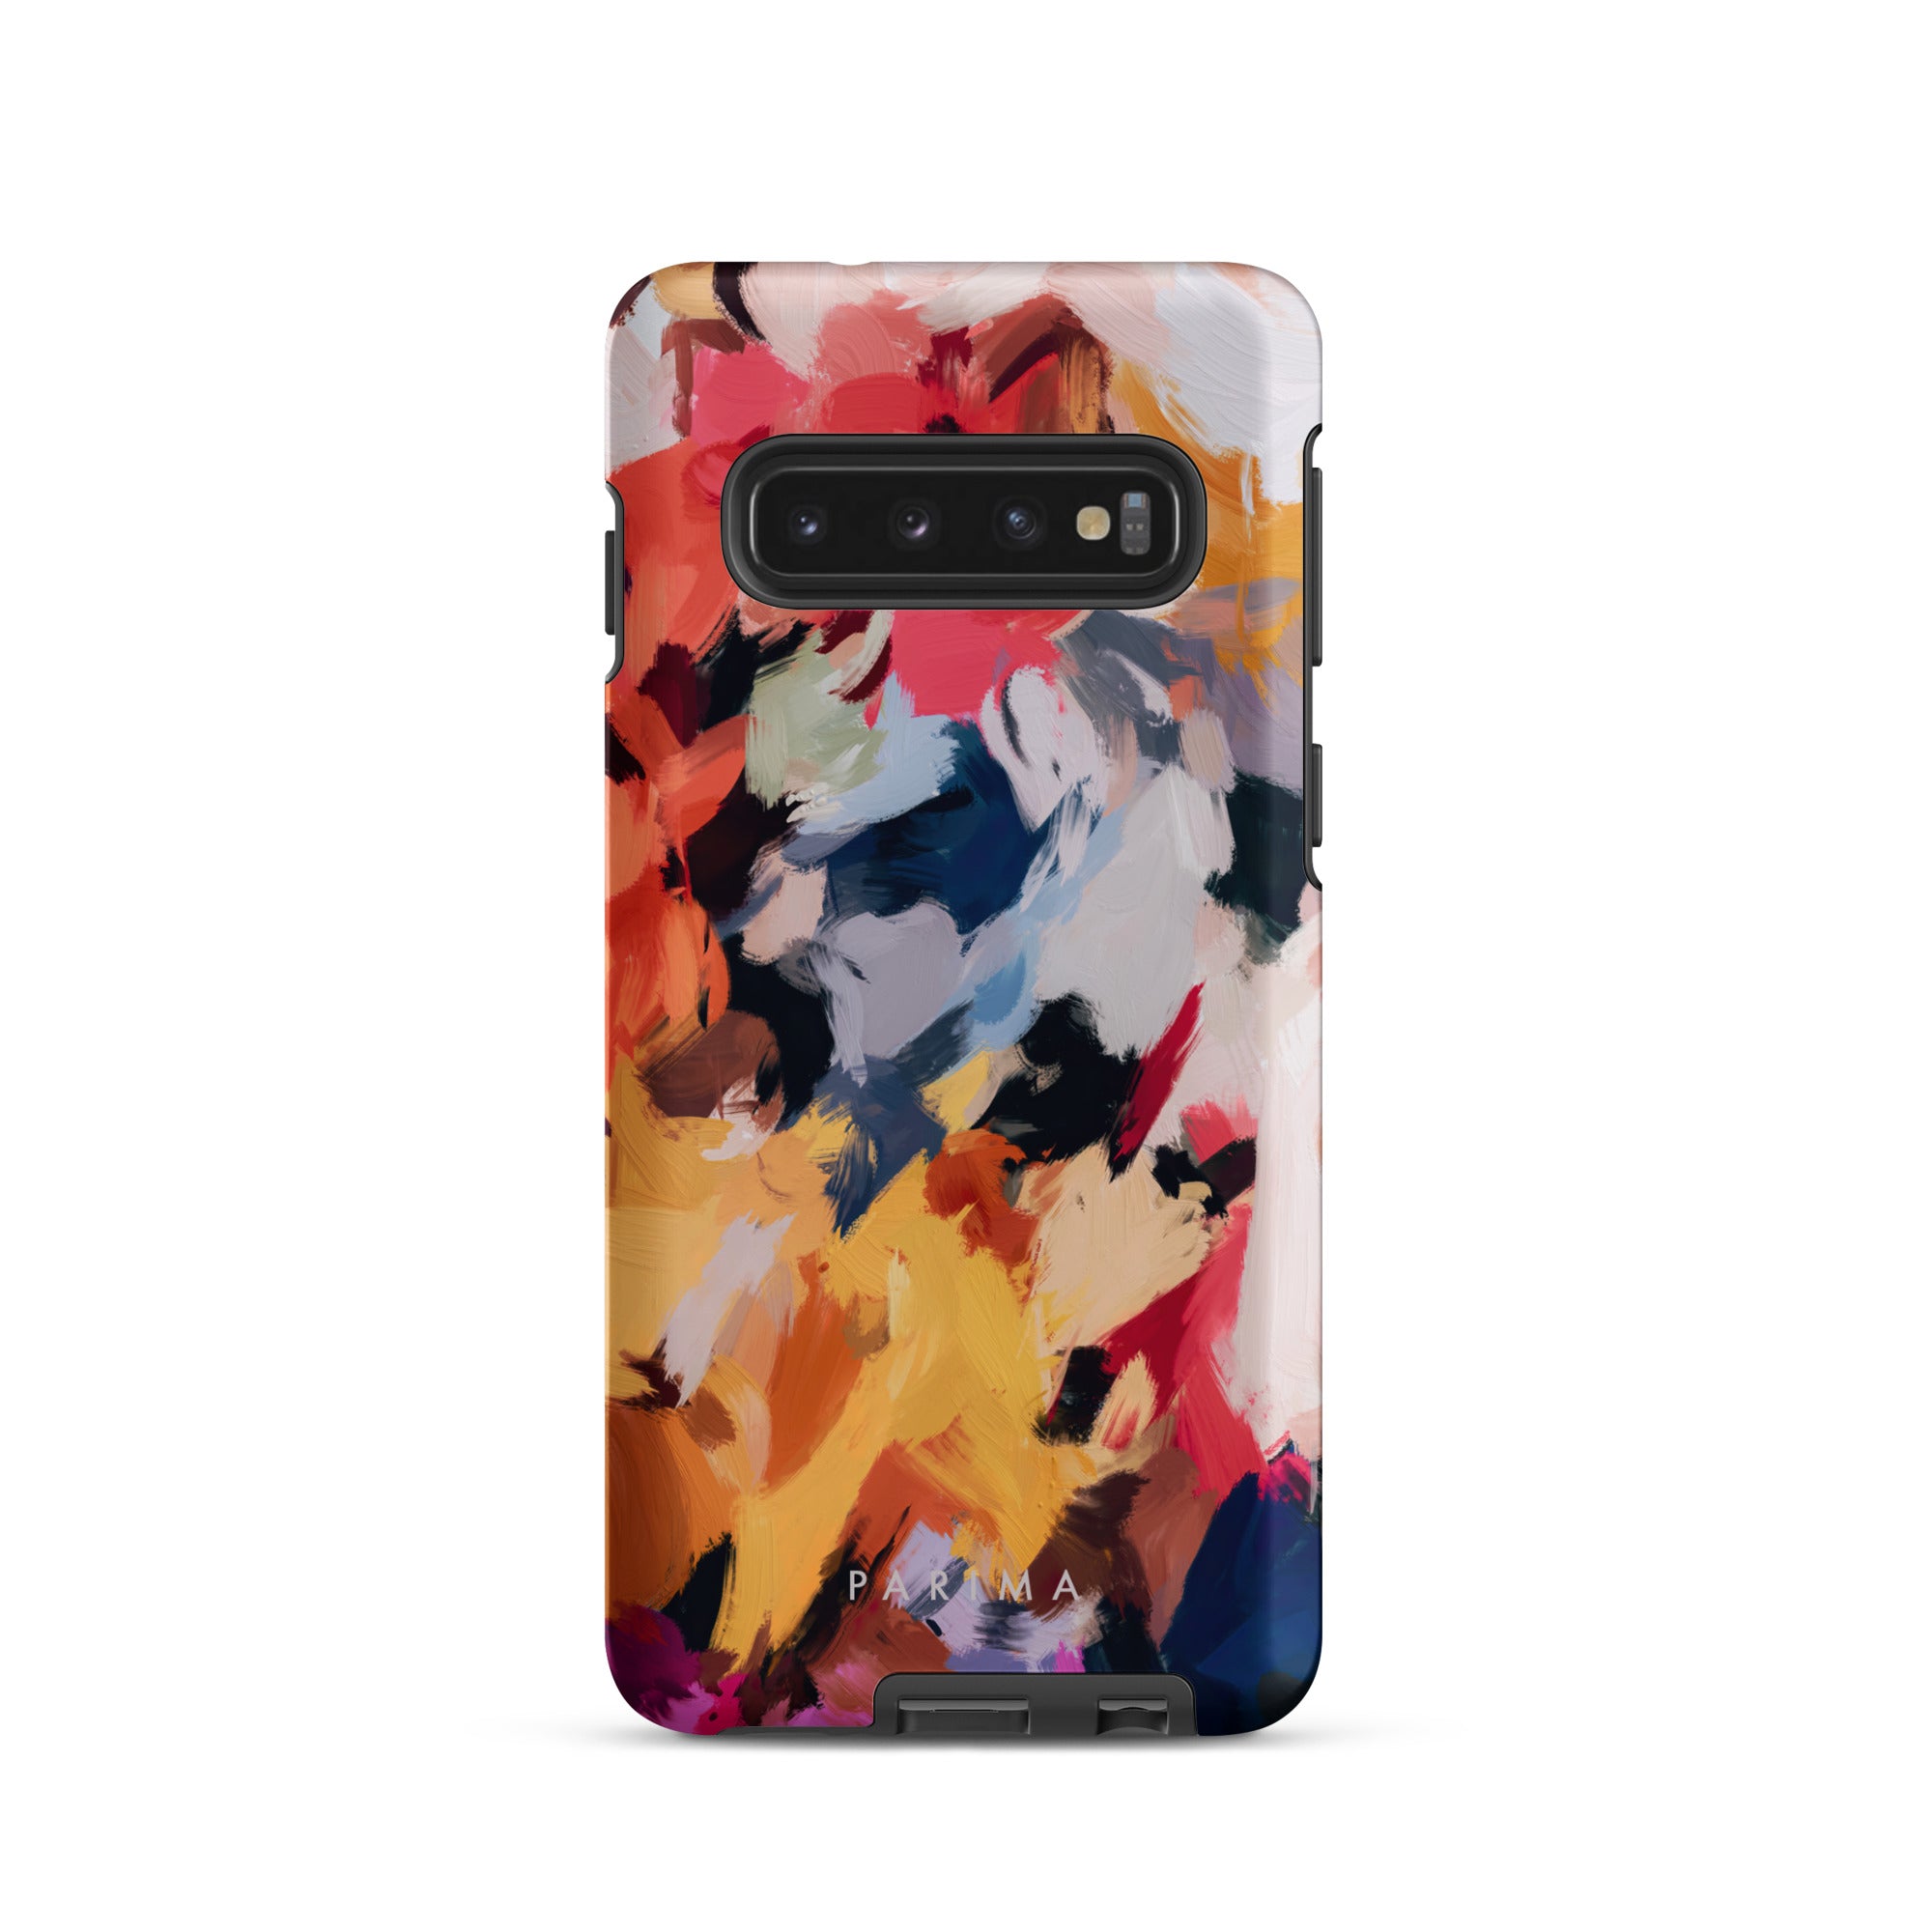 Wilde, blue and yellow multicolor abstract art on Samsung Galaxy S10 tough case by Parima Studio